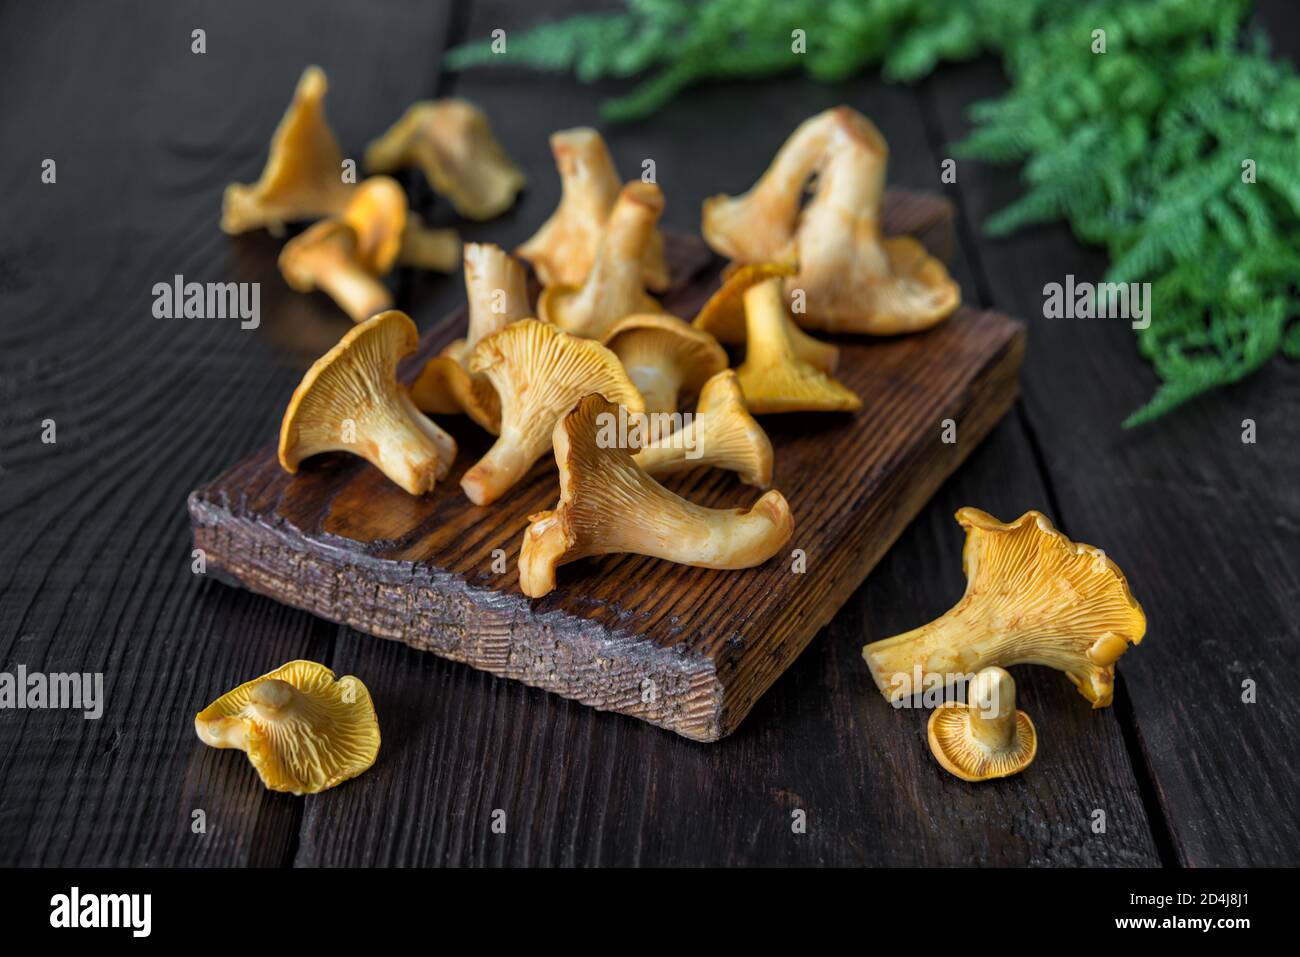 Yellow chanterelle mushrooms are on an old cutting board on a dark wooden table Stock Photo